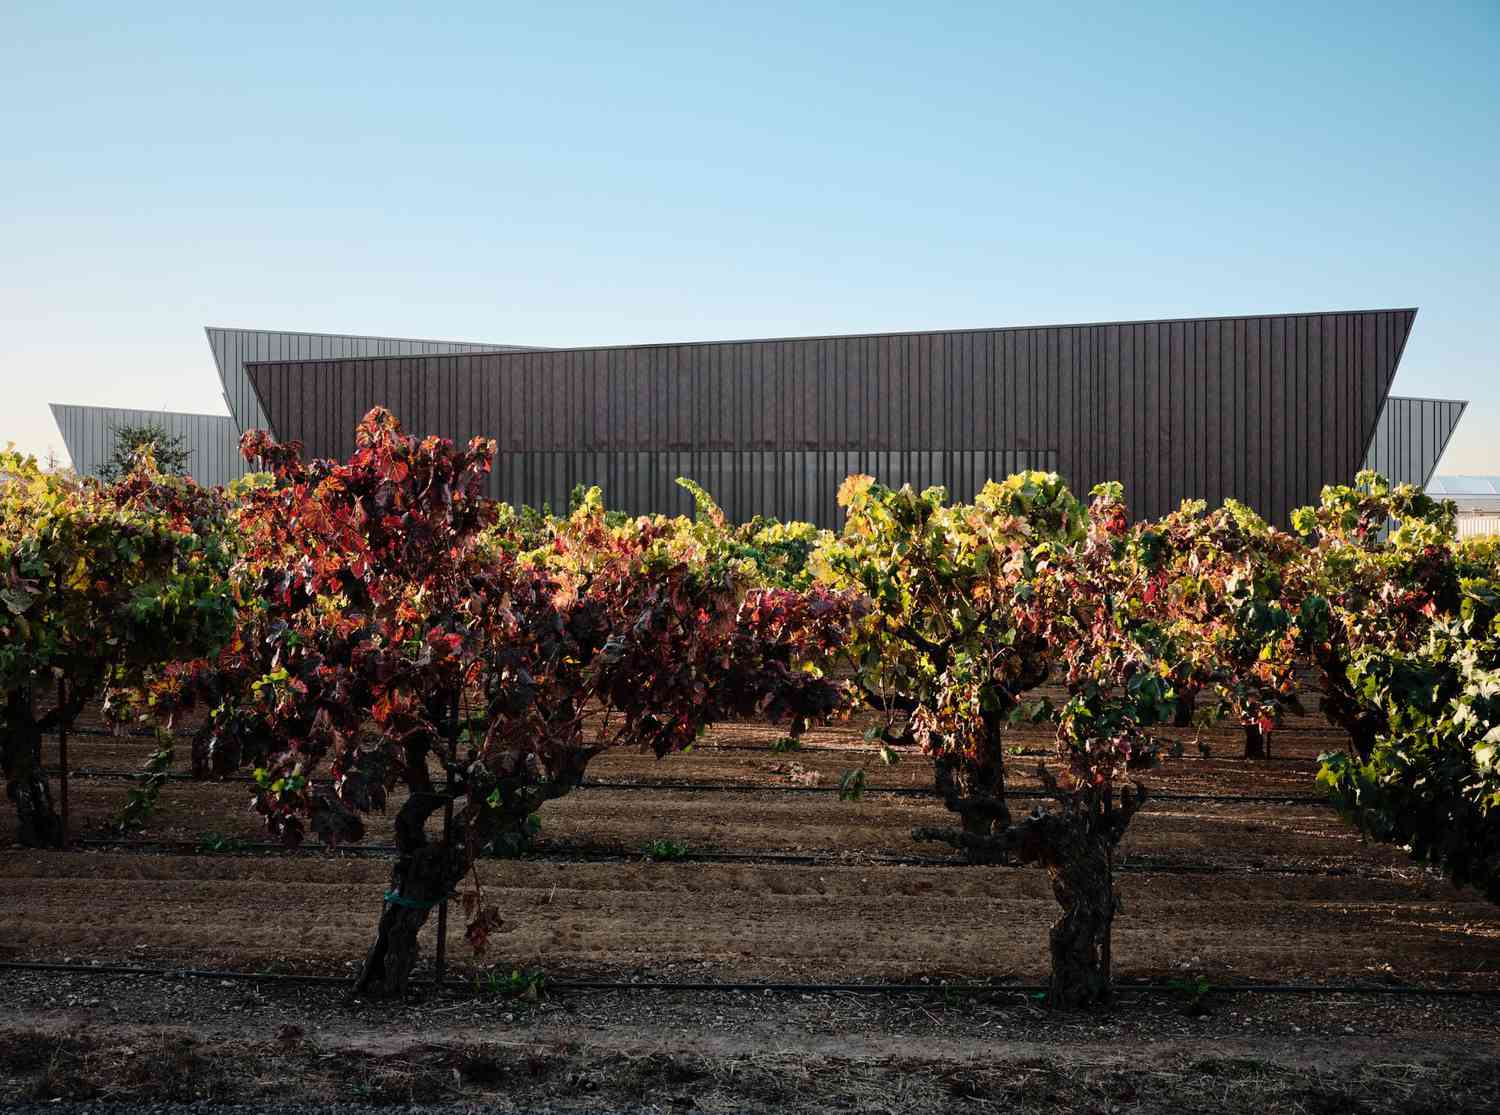 vineyard and exterior building image aperture winery